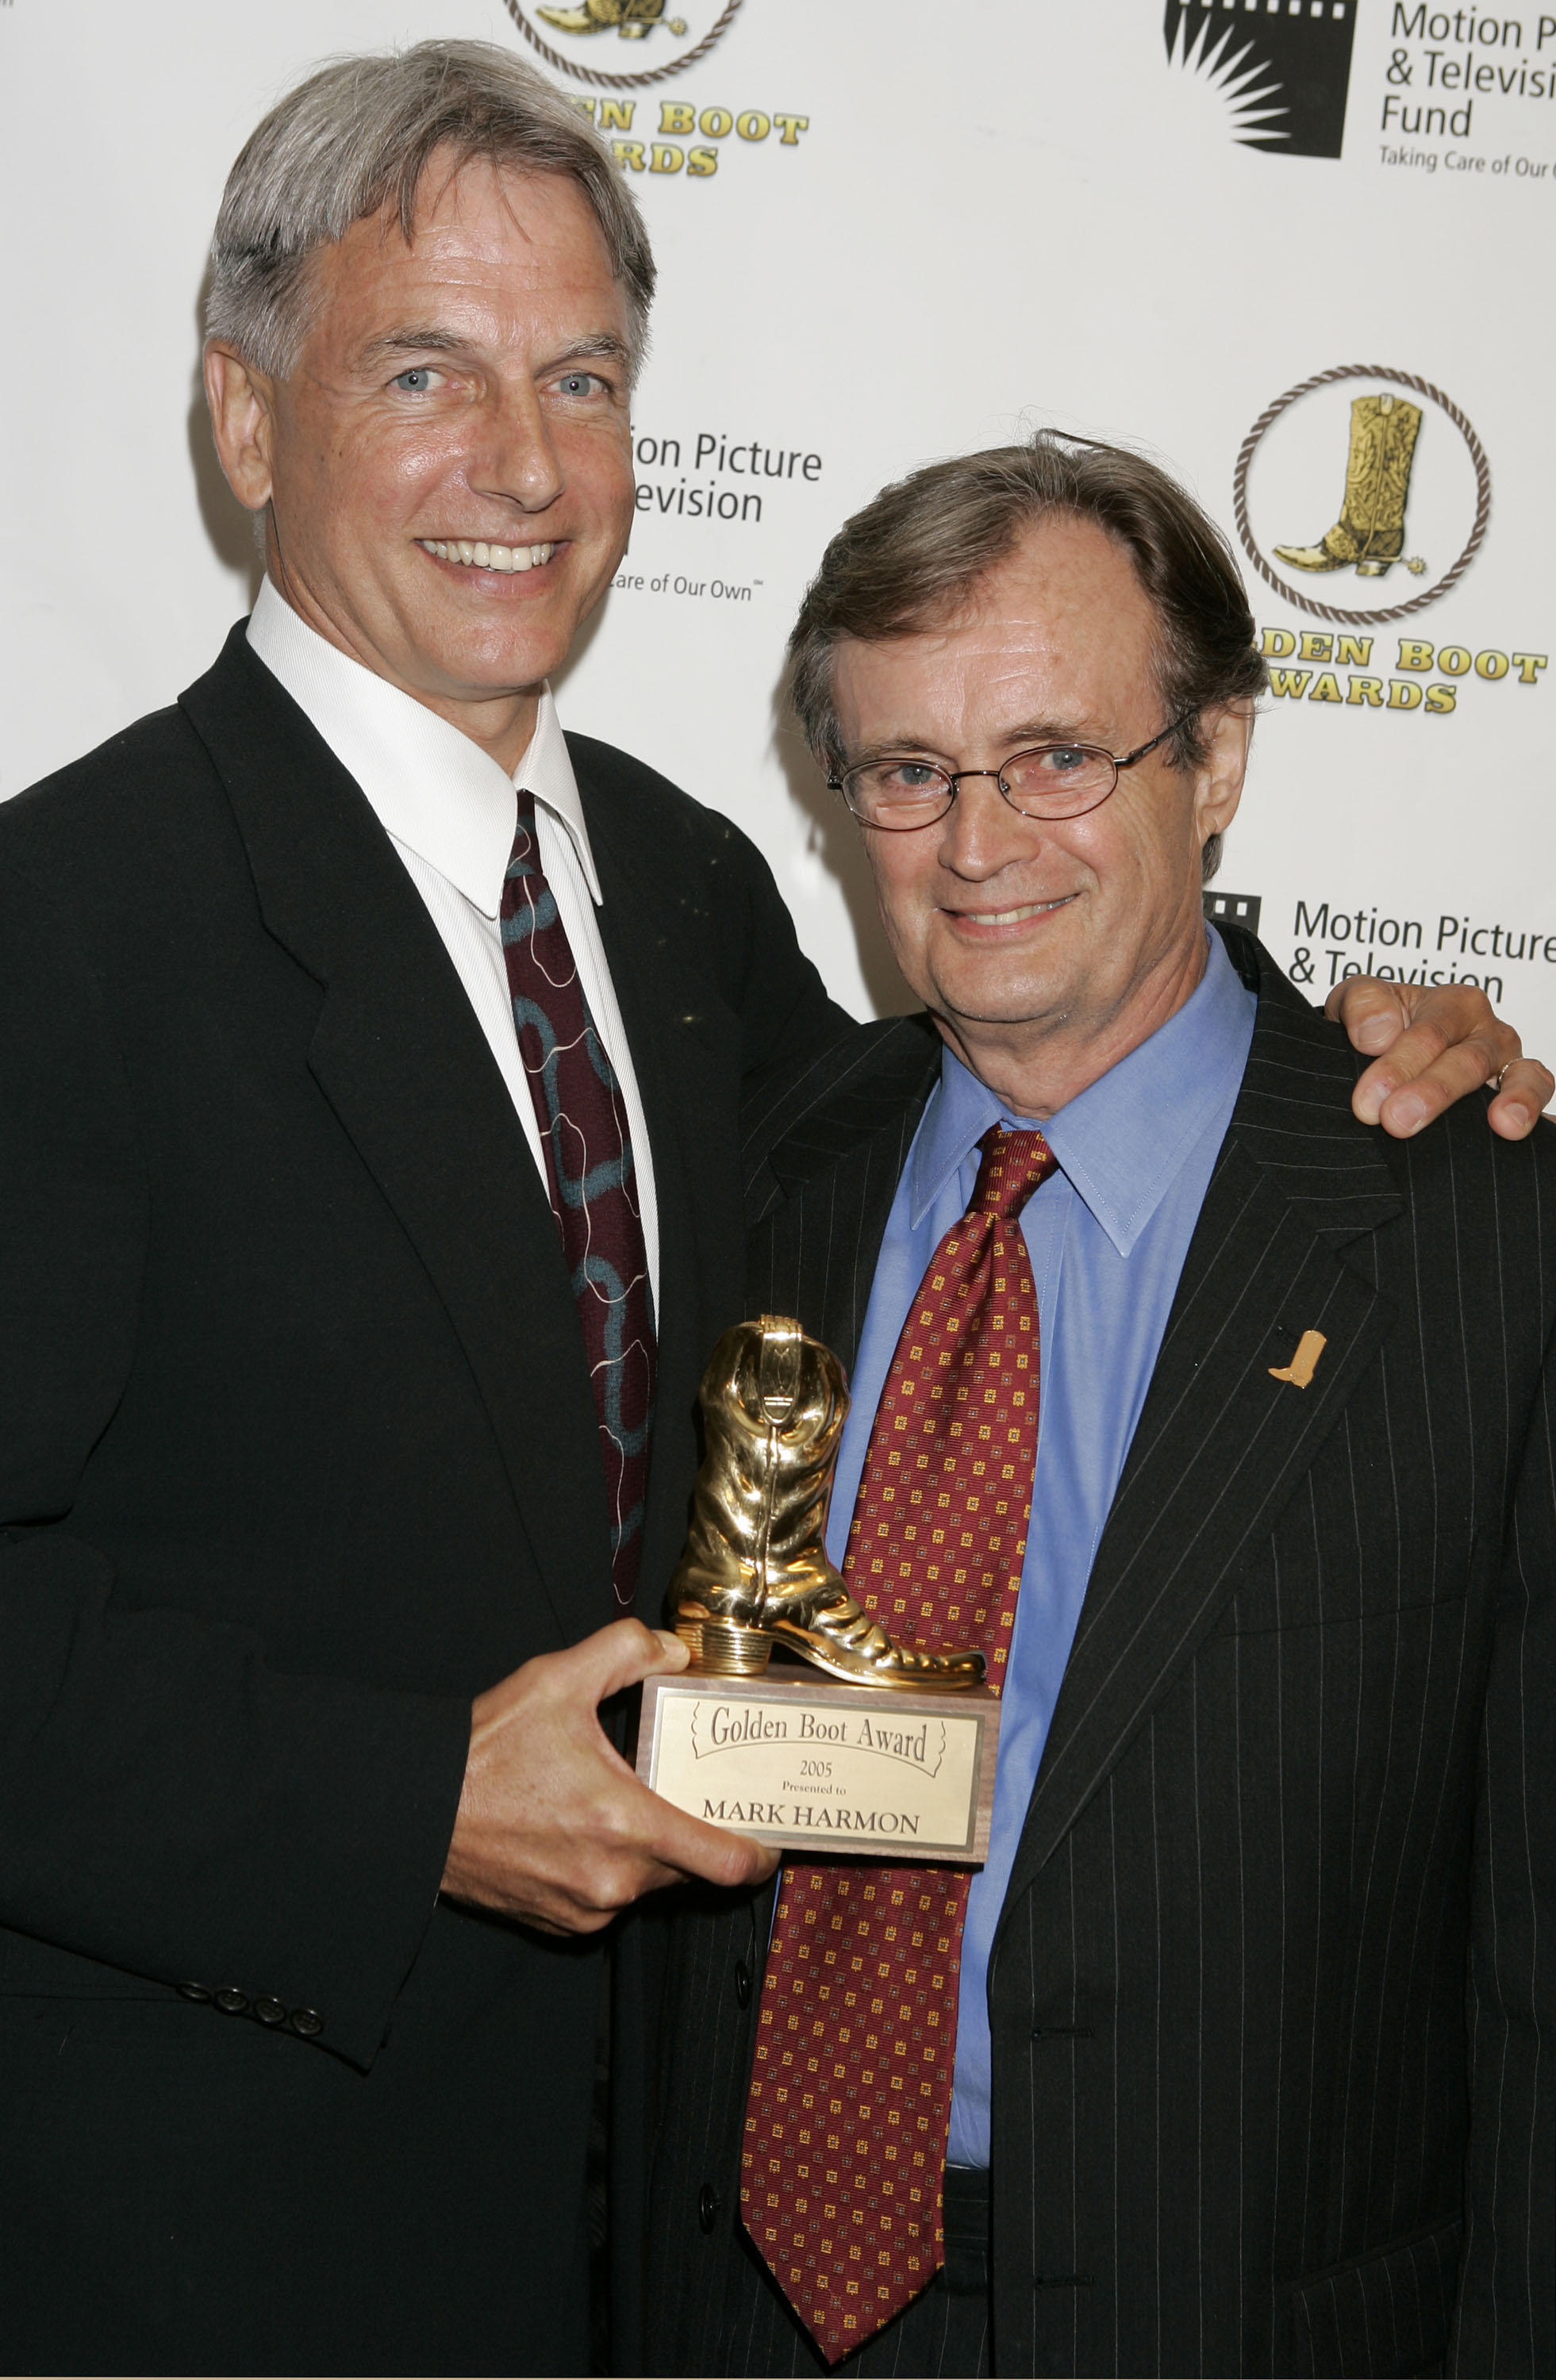 Mark Harmon and David McCallum at the 23rd Annual Golden Boot Awards on August 13, 2005 | Source: Getty Images